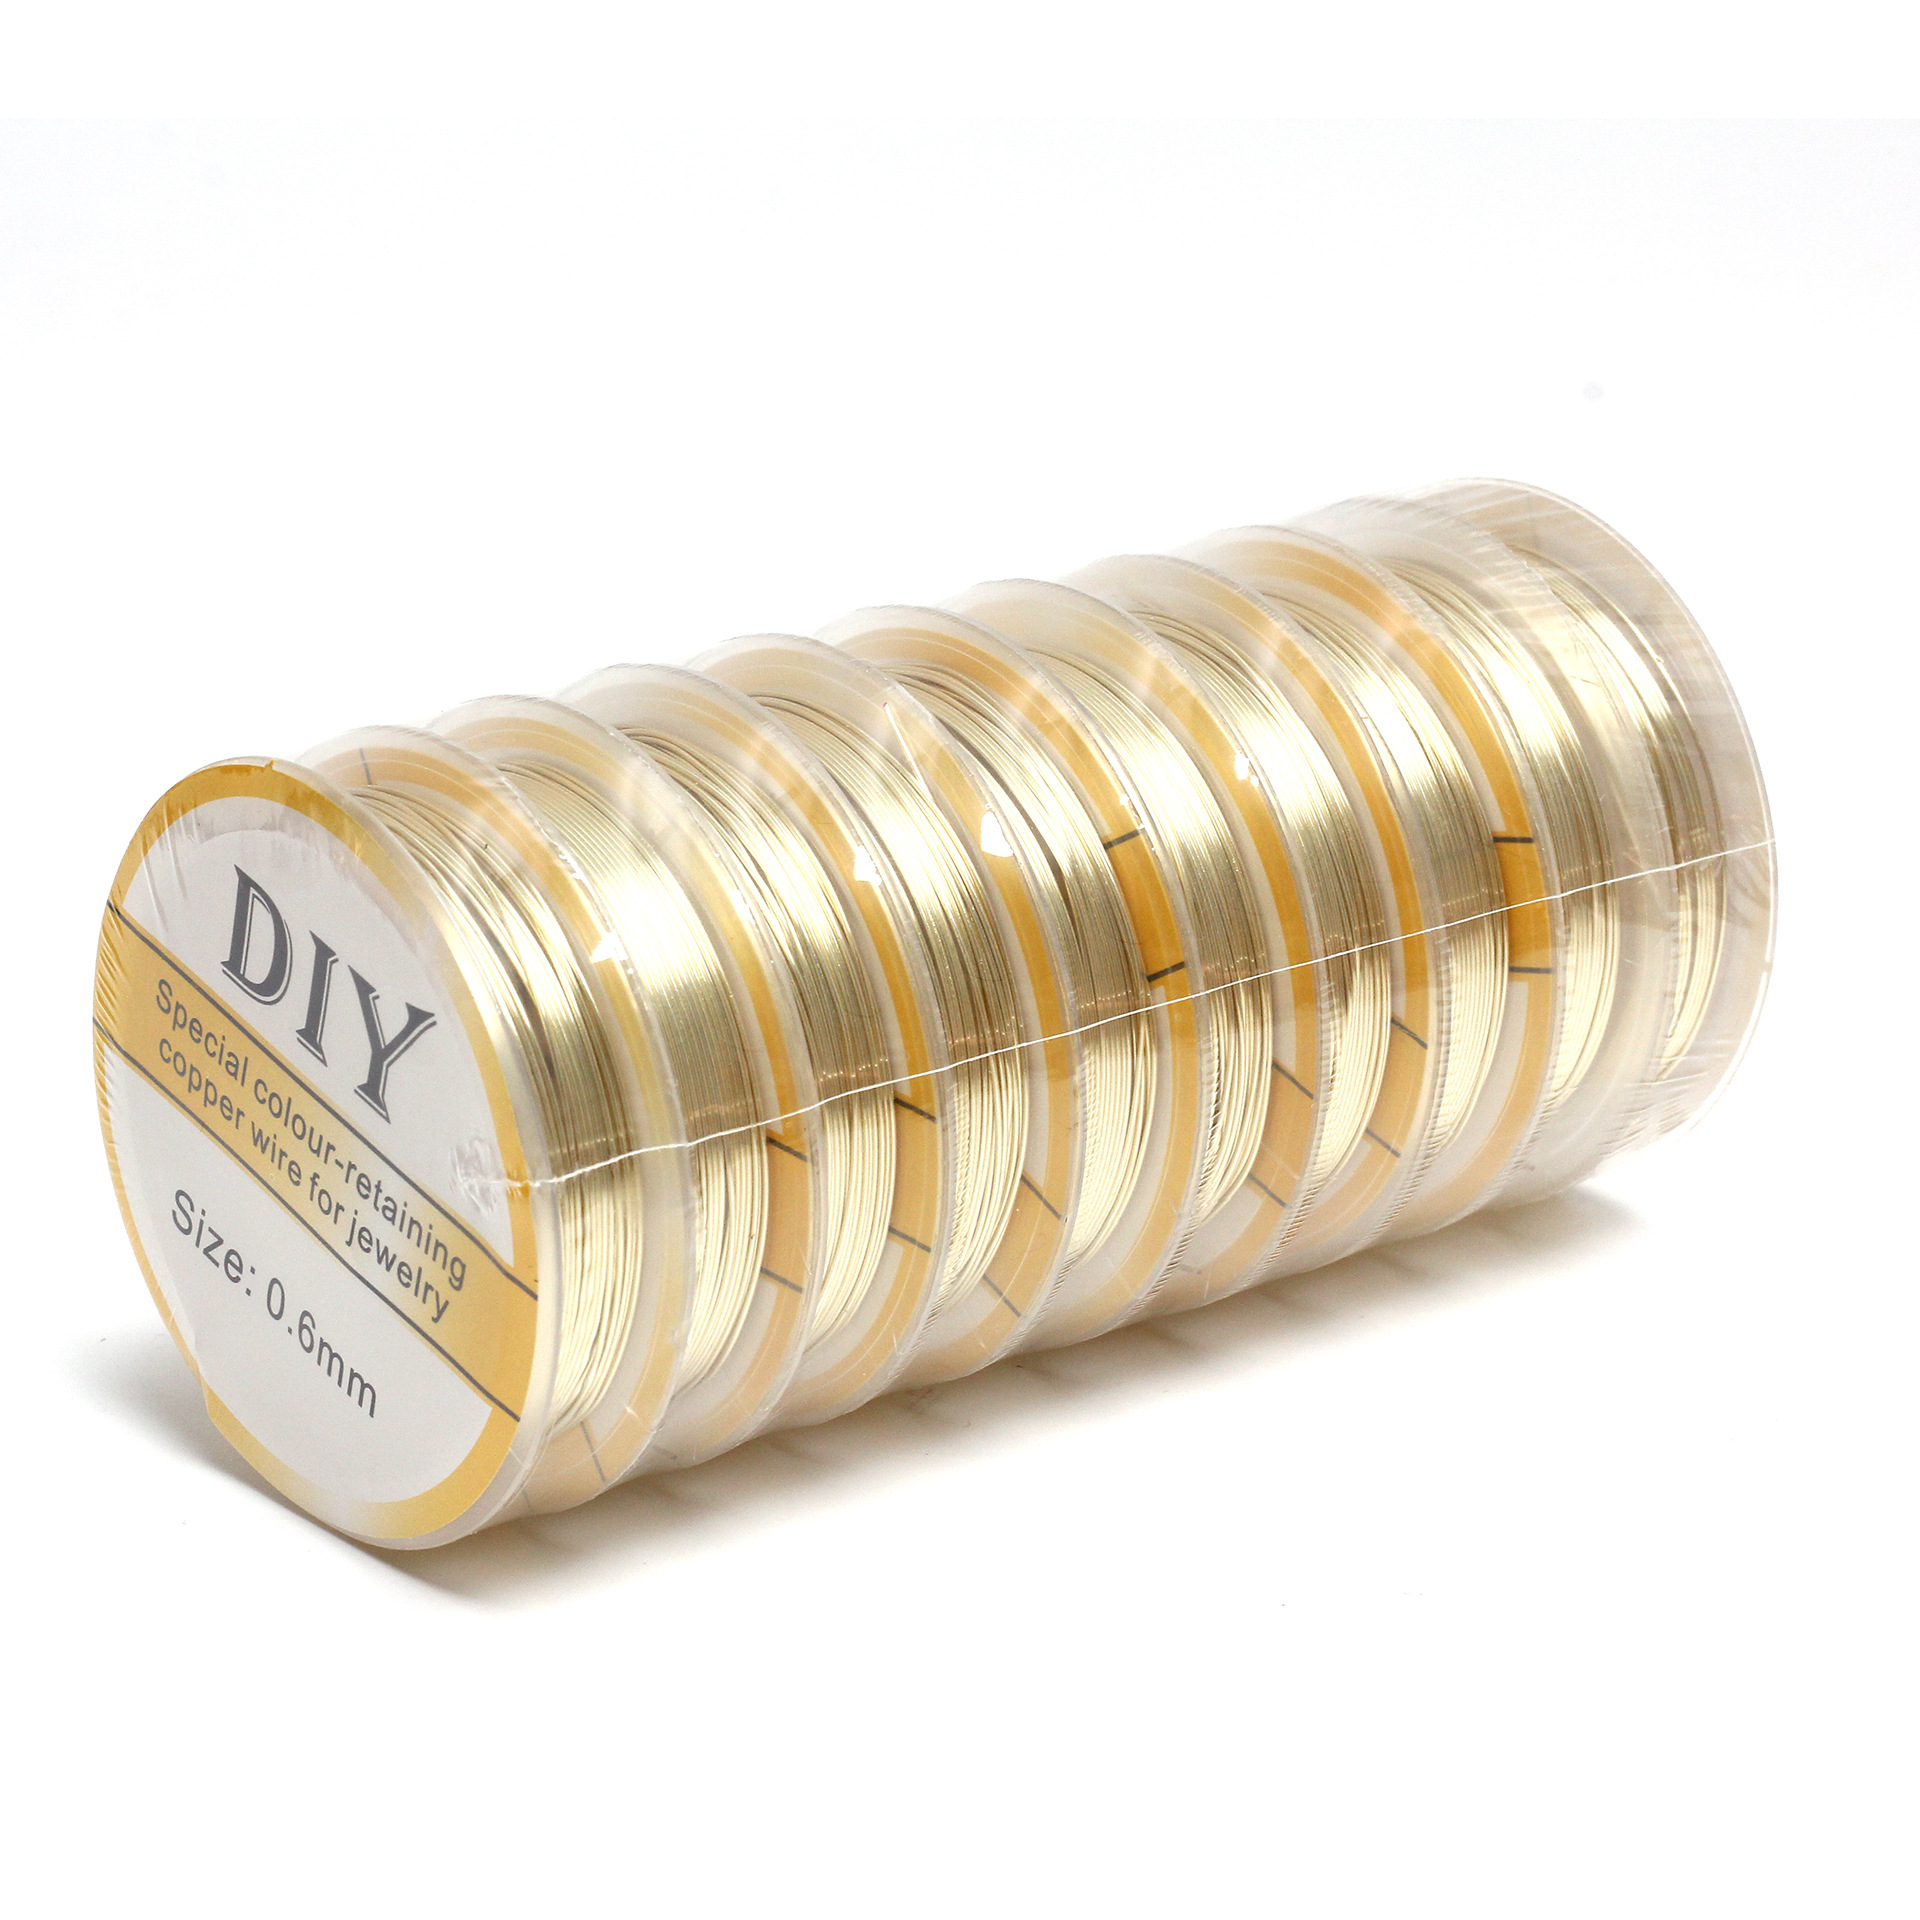 Light Gold 0.4mm copper wire one 10m